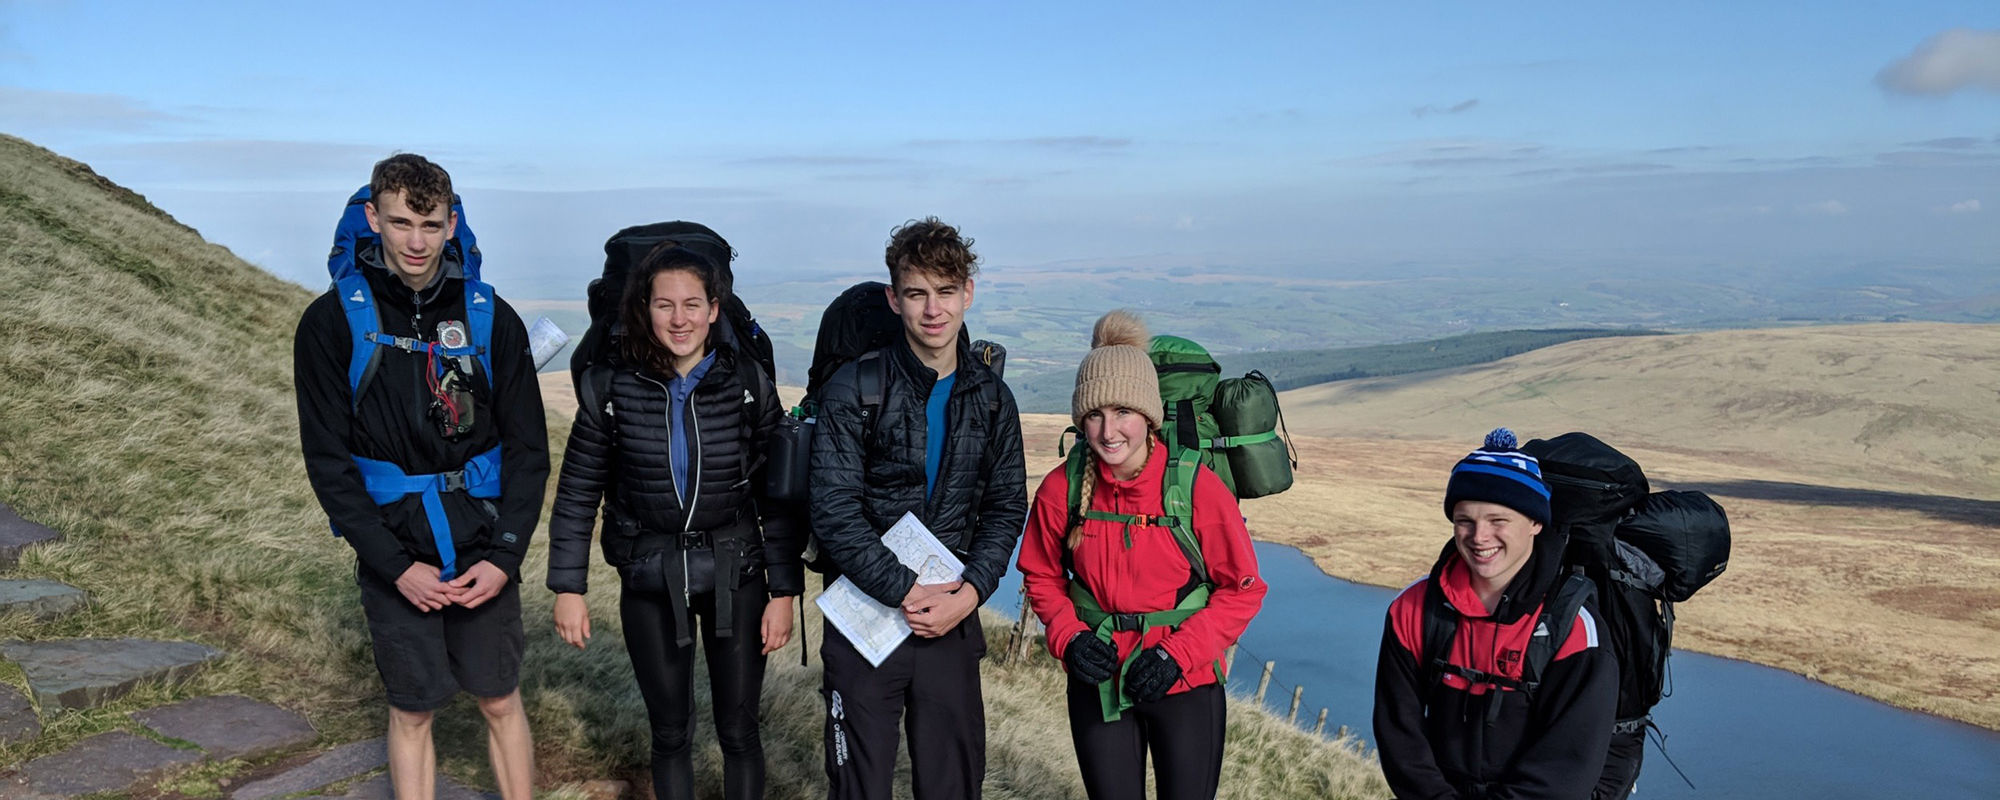 wycliffe pupils on a trip outdoors